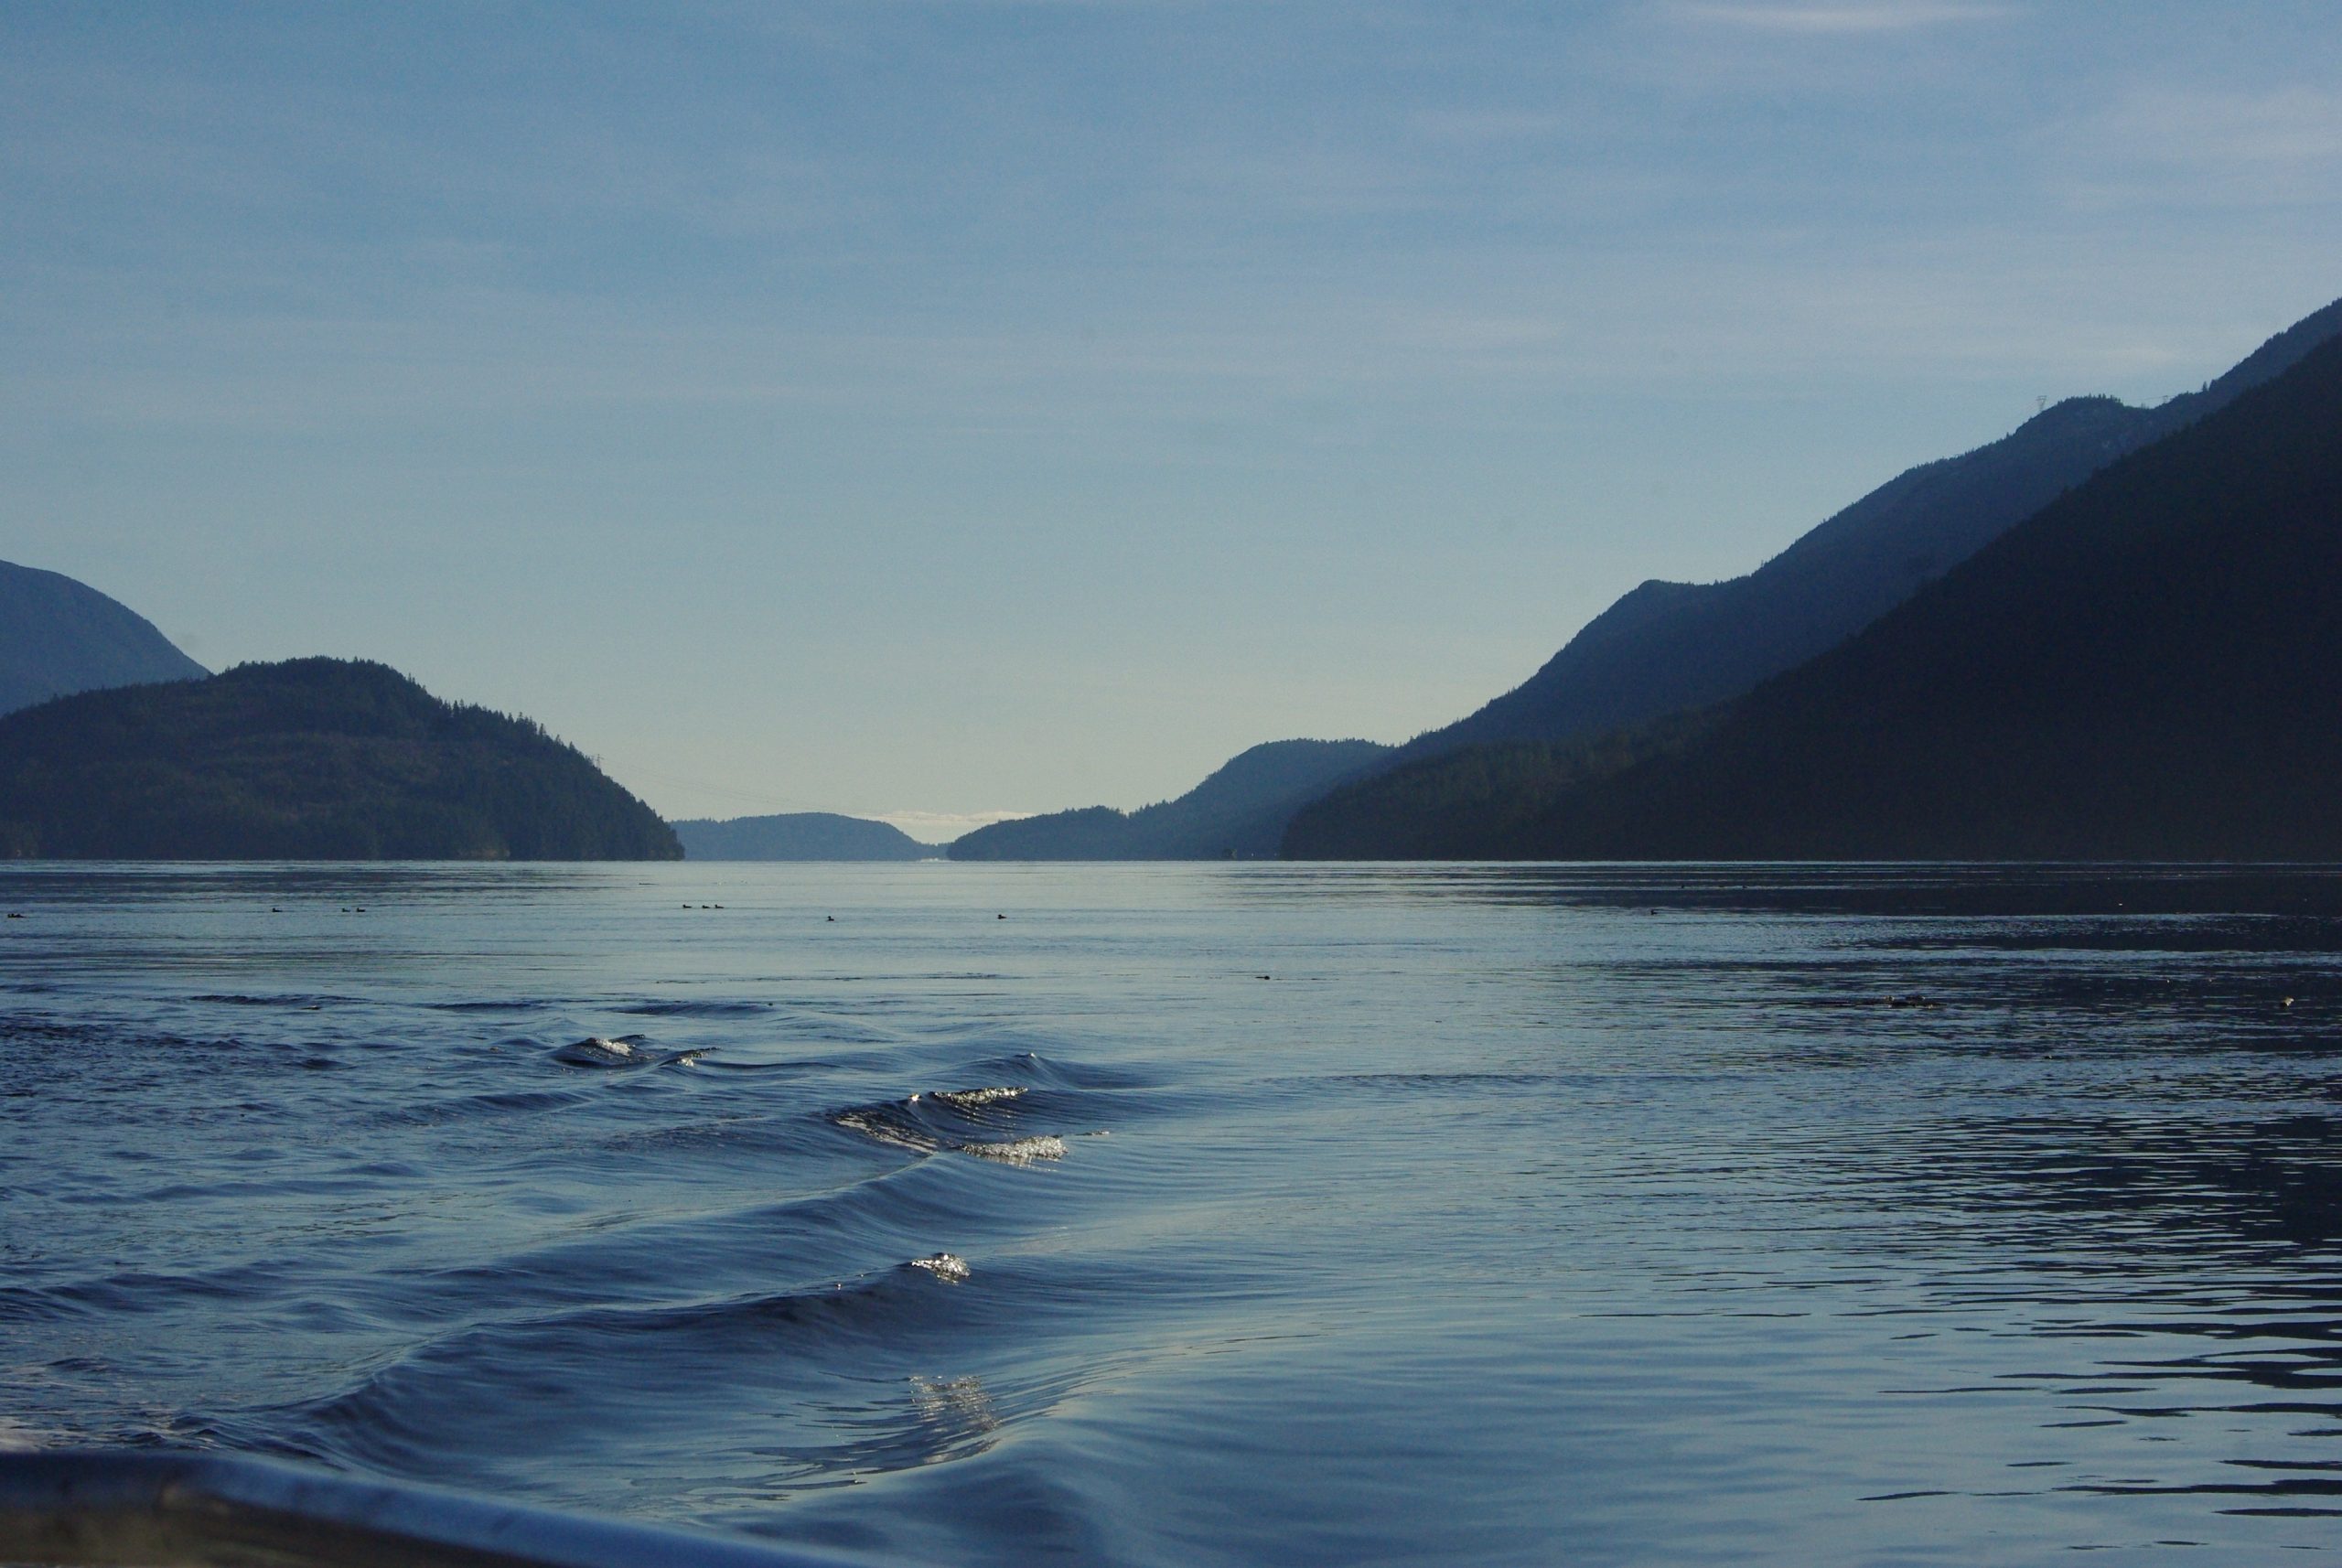 Calm seas, late afternoon in Jervis Inlet